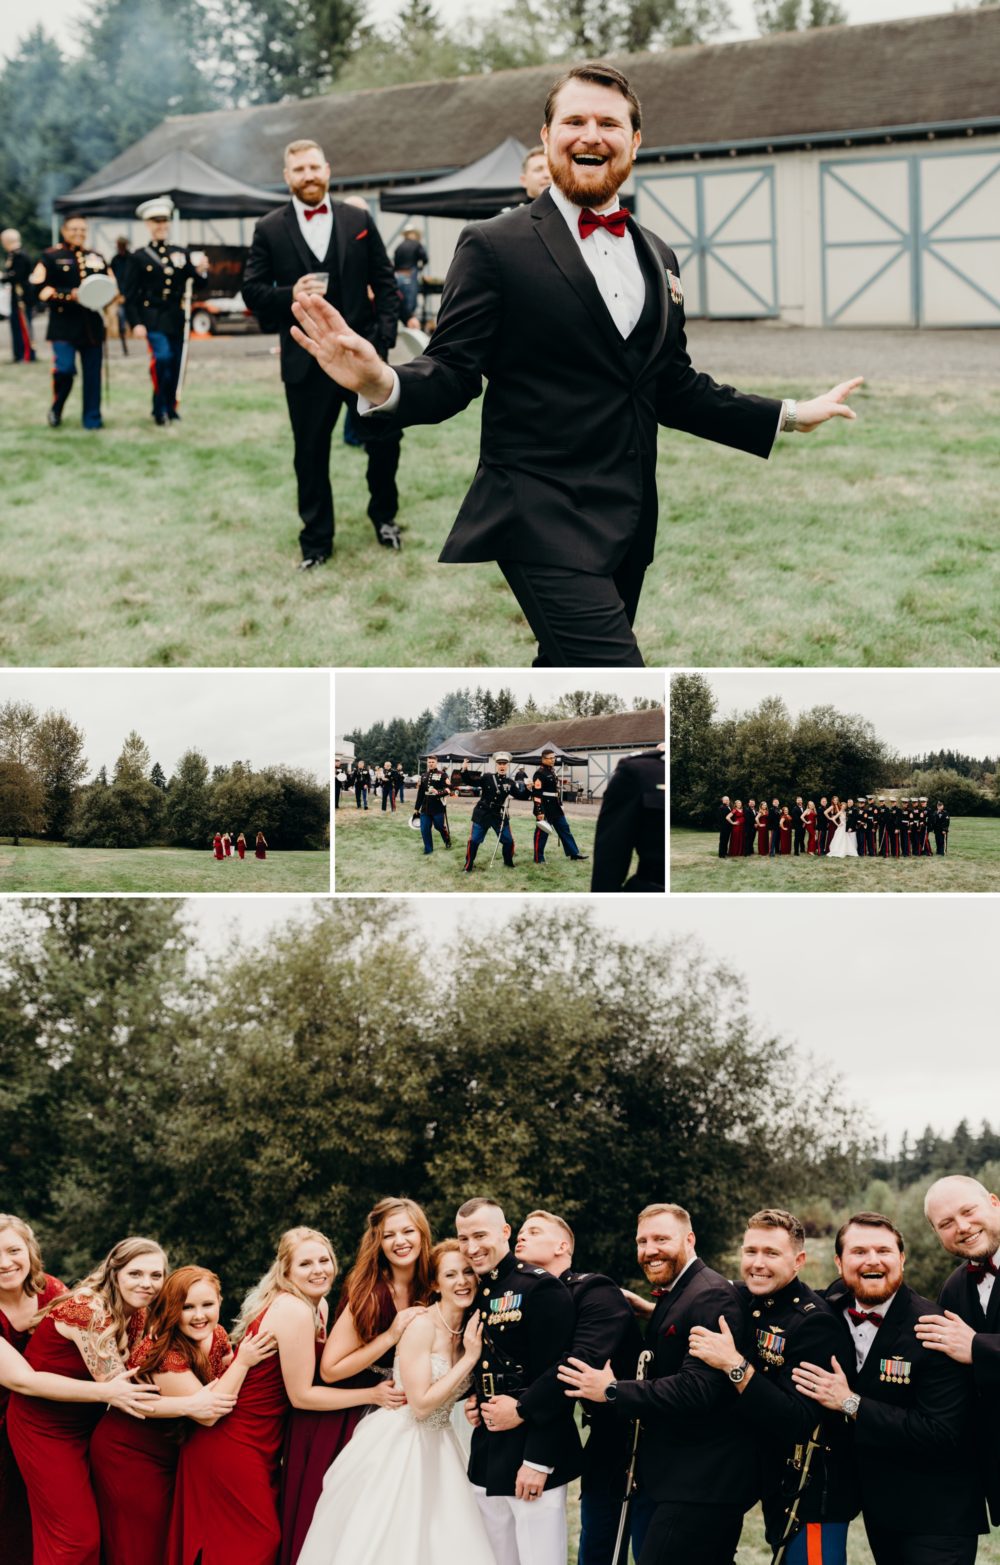 This wedding party was SO much fun! By Seattle wedding photographer Briana Morrison